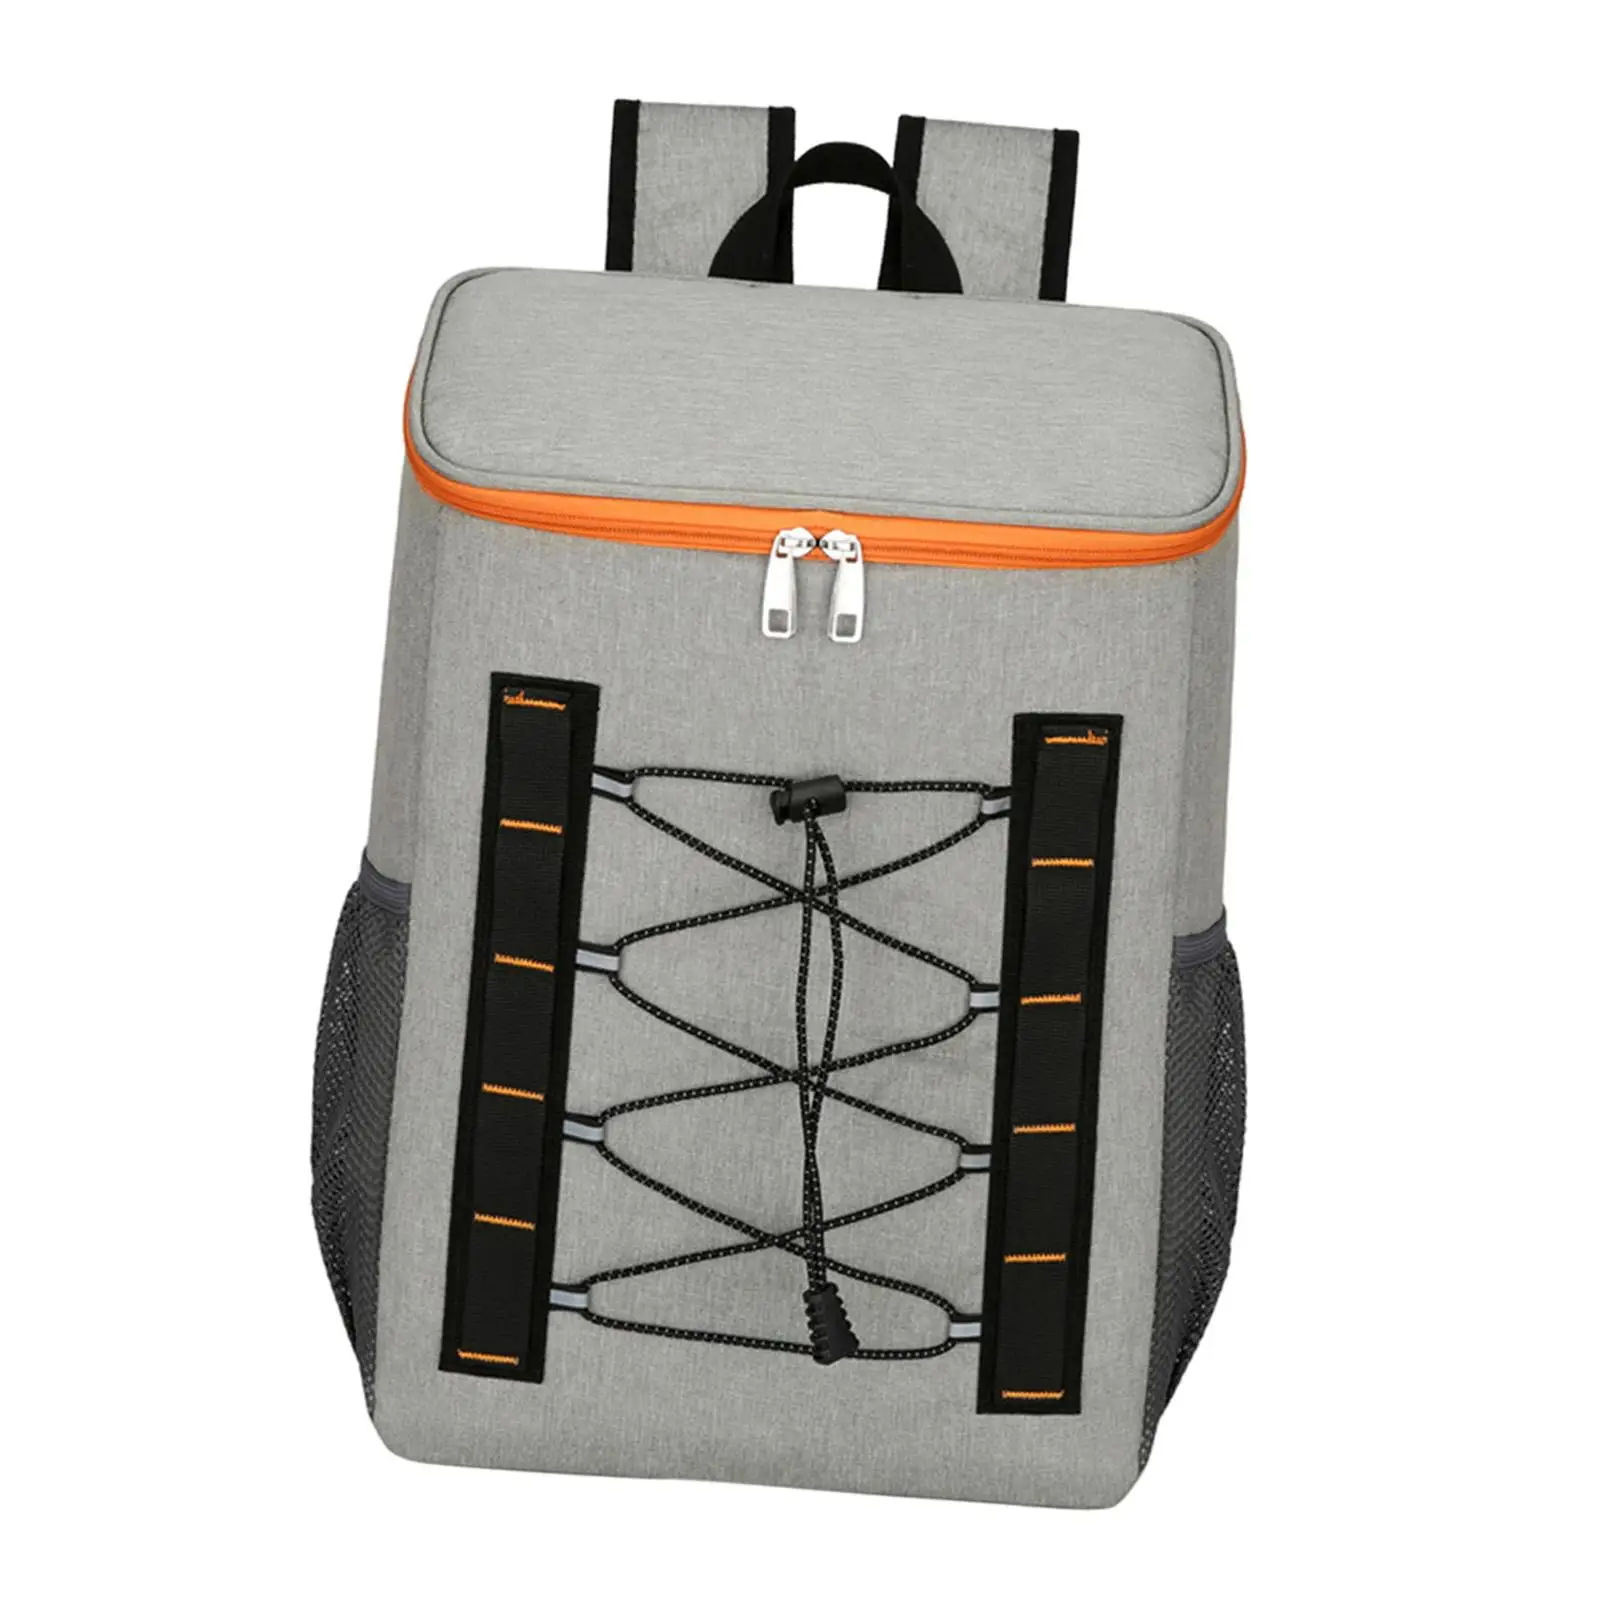 Outdoor Picnic Bag Mesh Pocket Oxford Cloth Refrigerated Backpack Insulated Backpack for Picnic Hiking Fishing Travel Trips